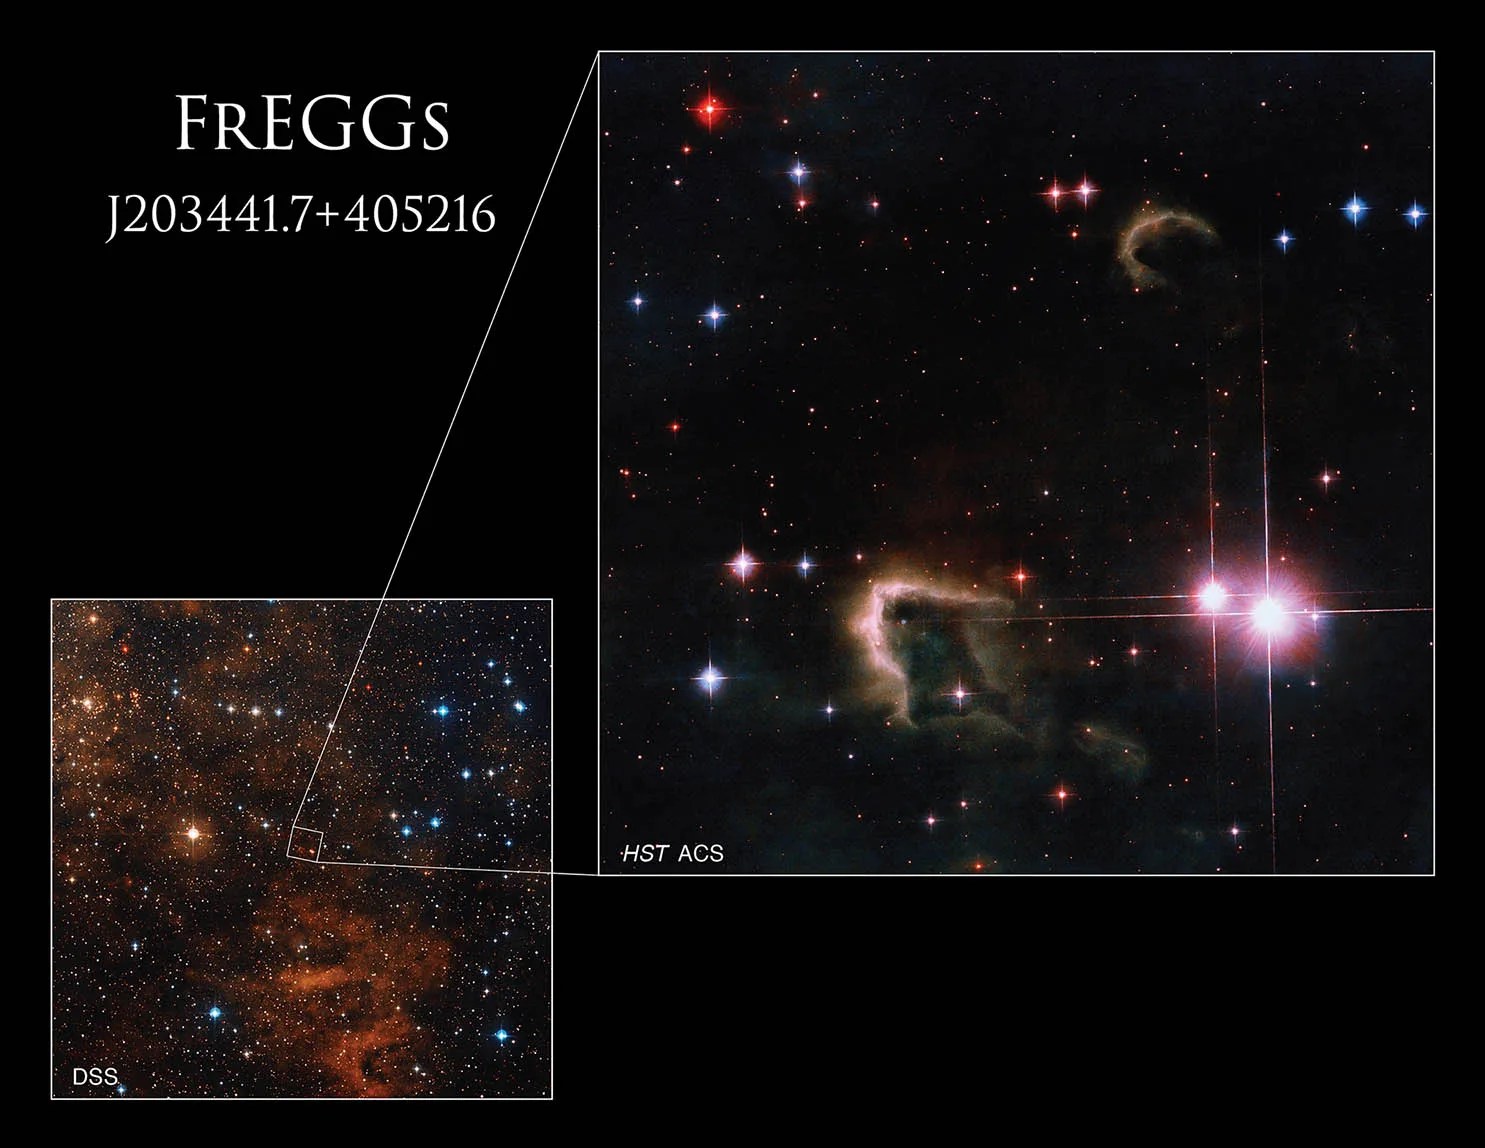 The lower-left Digitized Sky Survey image illustrates the location of Free-floating Evaporating Gaseous Globules (frEGGs) shown in the upper-right Hubble image.